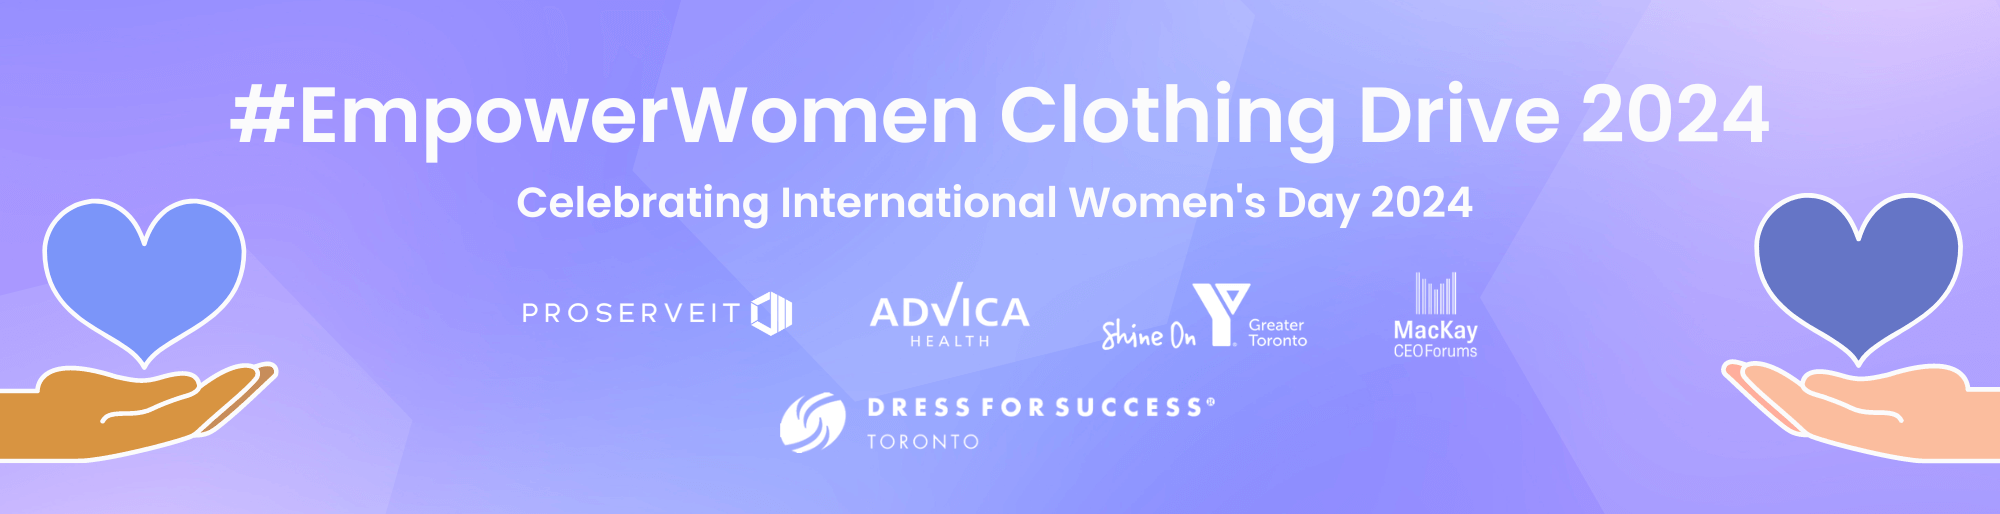 Empower Women Clothing Drive - banner